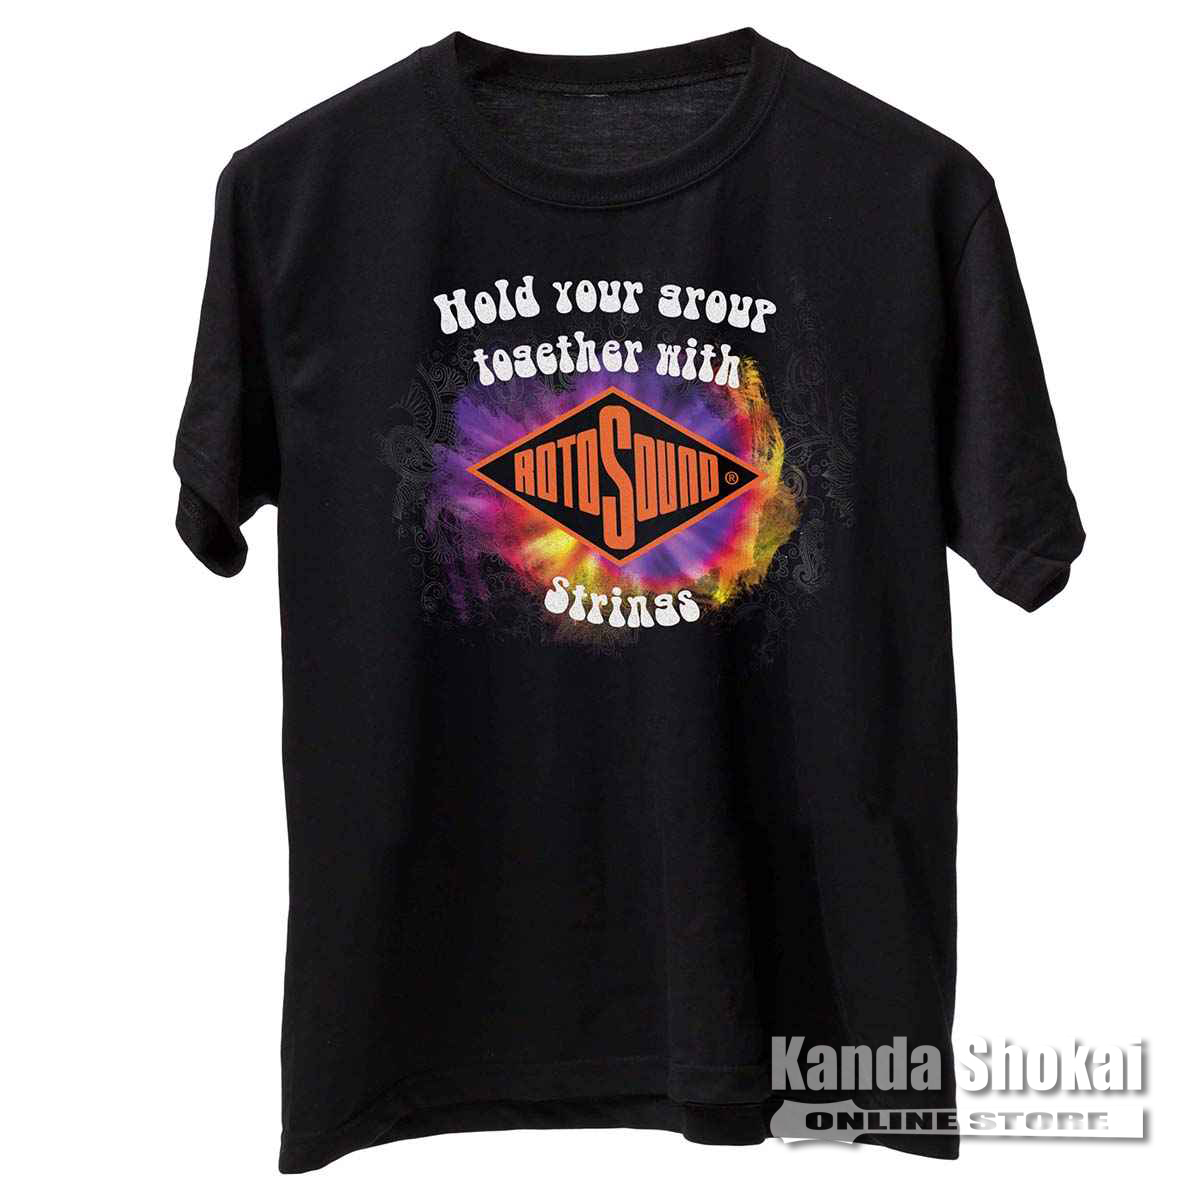 Rotosound ( ロトサウンド ) Hold Your Group Togerther with Rotosound Strings T-Shirt, Extra Large｜kanda-store